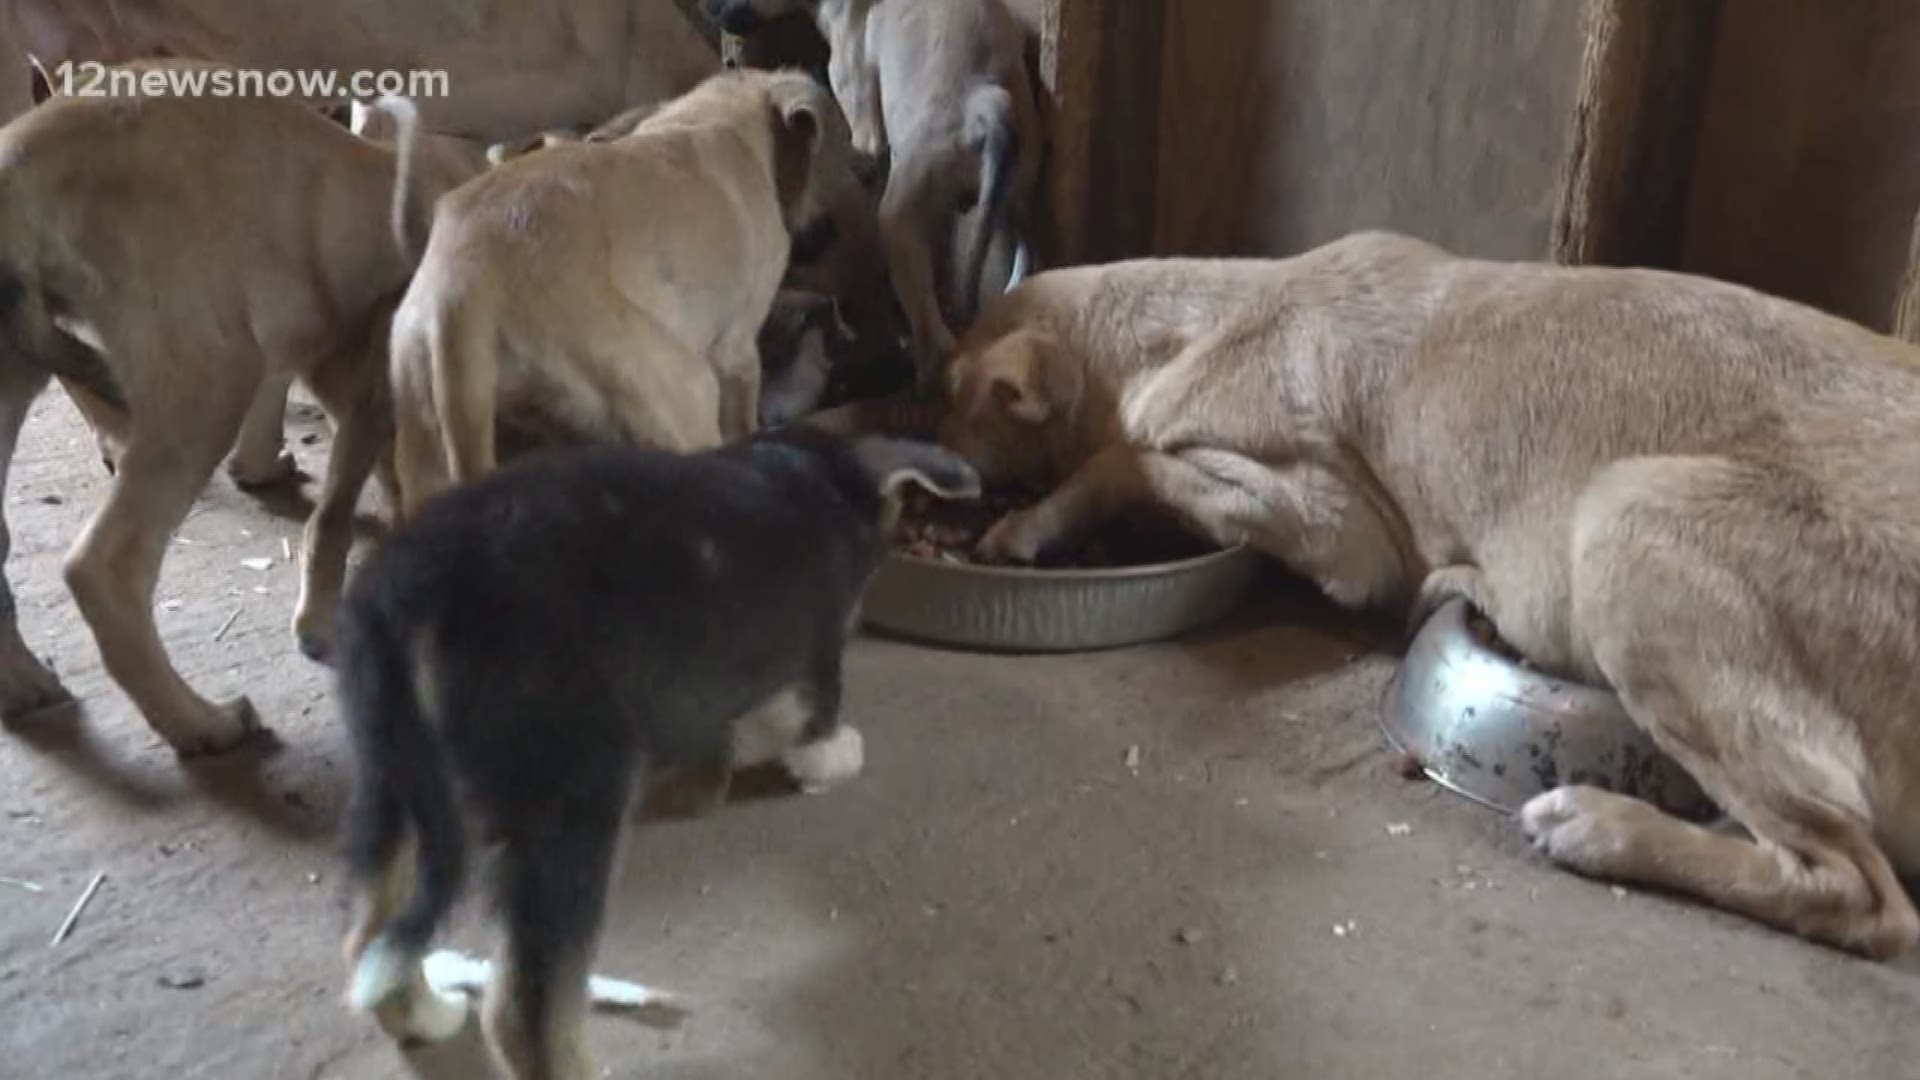 Michael Gray began taking in stray dogs months ago, but things got out of hand.